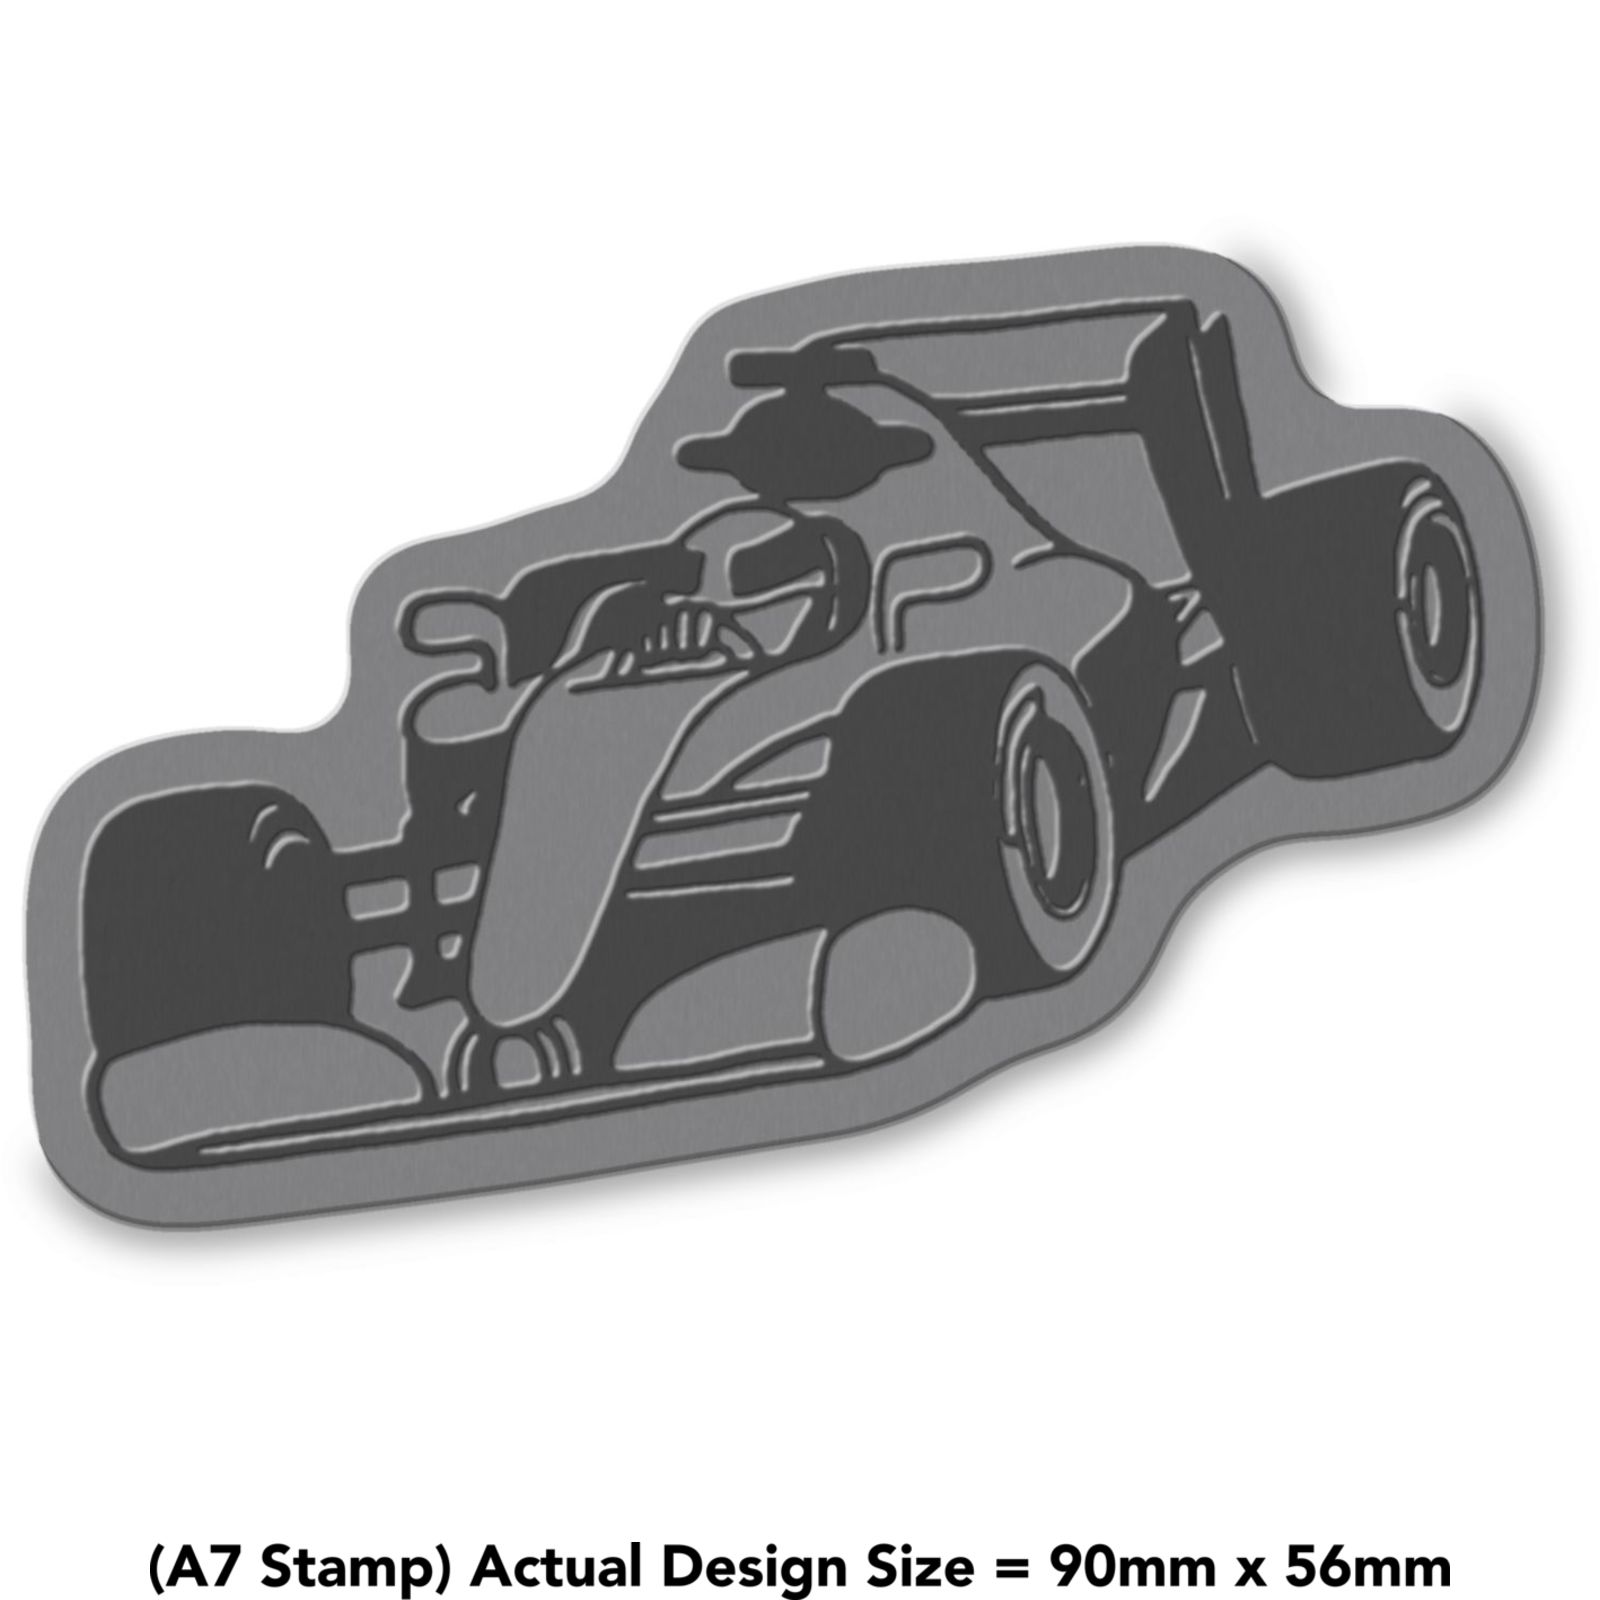 Azeeda A7 F1 Race Car Unmounted Rubber Stamp RS00012124 